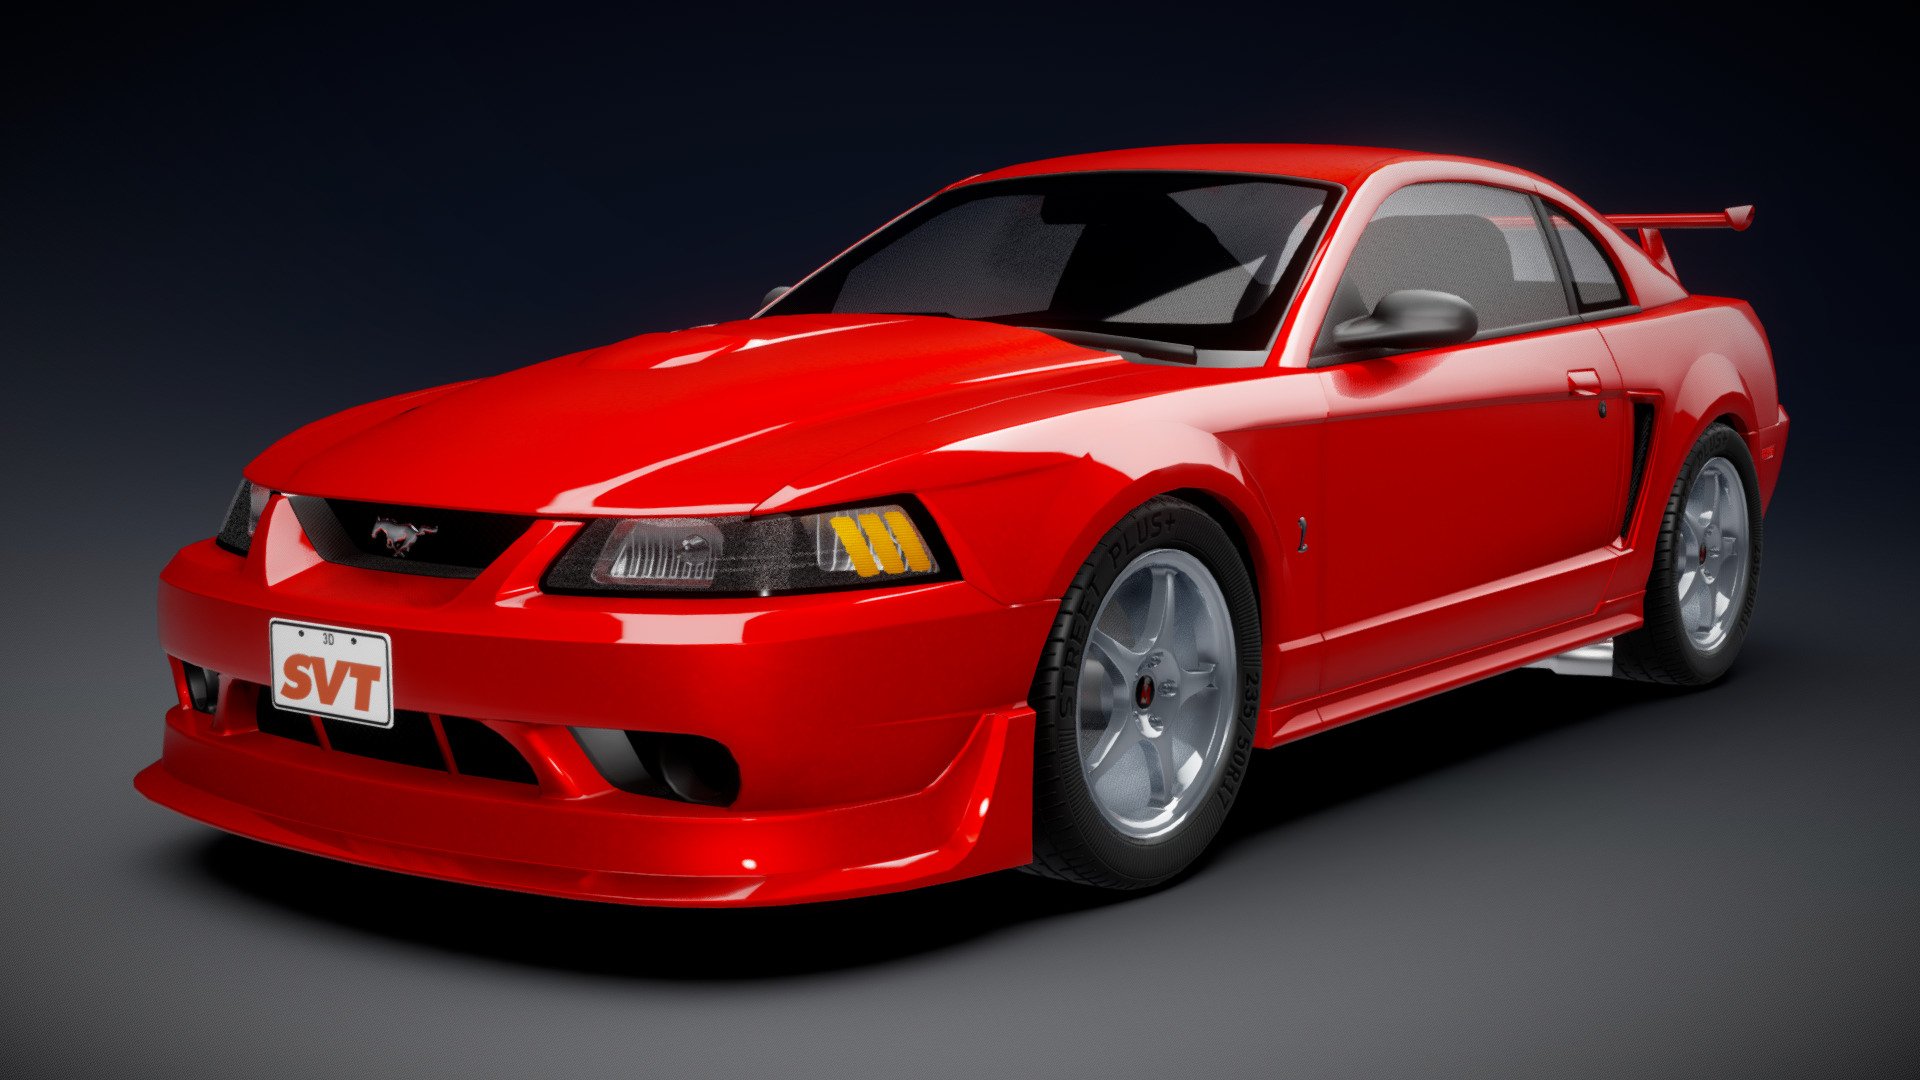 The 2000 SVT Mustang Cobra R debuted as the fastest factory Mustang ever produced.
Like all SVT Cobra Rs before it, the 2000 R came stripped of any stock feature not needed for track use or that would add excess weight. Recaro racing seats, side-exit dual exhaust, a front air splitter and high-mount rear wing hinted at the car’s superb stability and handling capabilities. Just 300 units were made, available only in Performance Red Clearcoat.

This model was a commission and will not be for sale 3d model